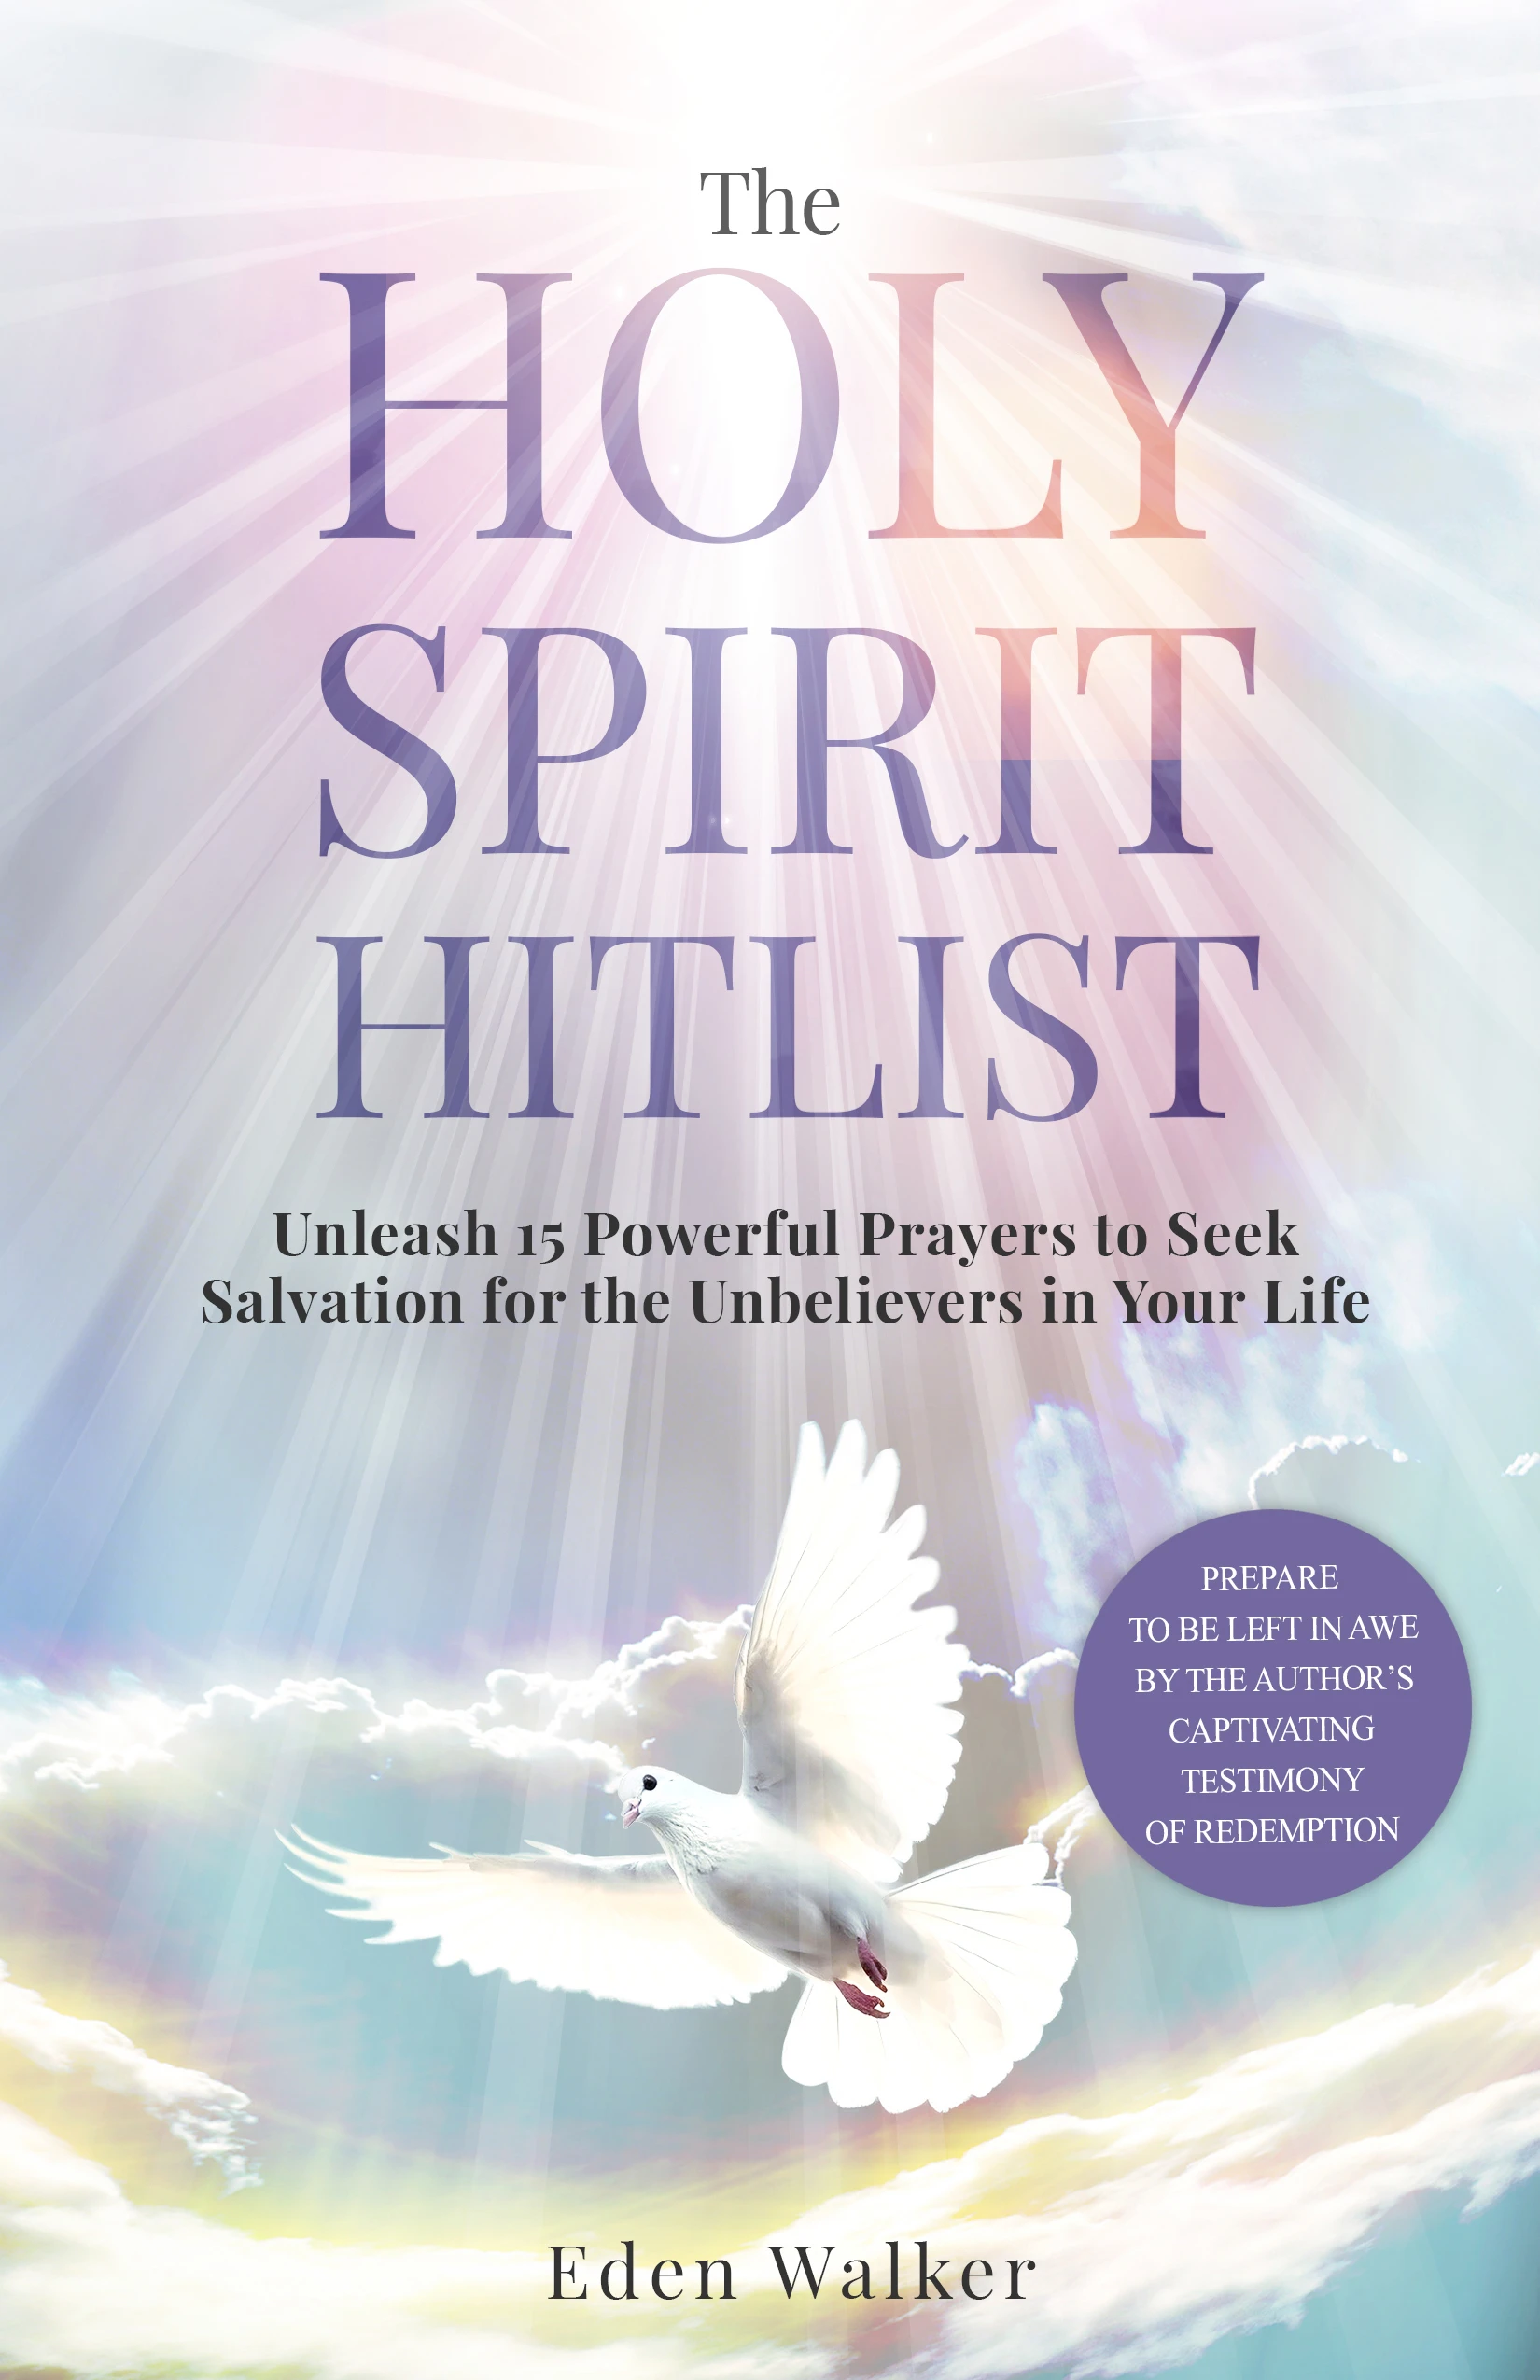 The Holy Spirit Hitlist: Unleash 15 Powerful Prayers to Seek Salvation for the Unbelievers in Your Life